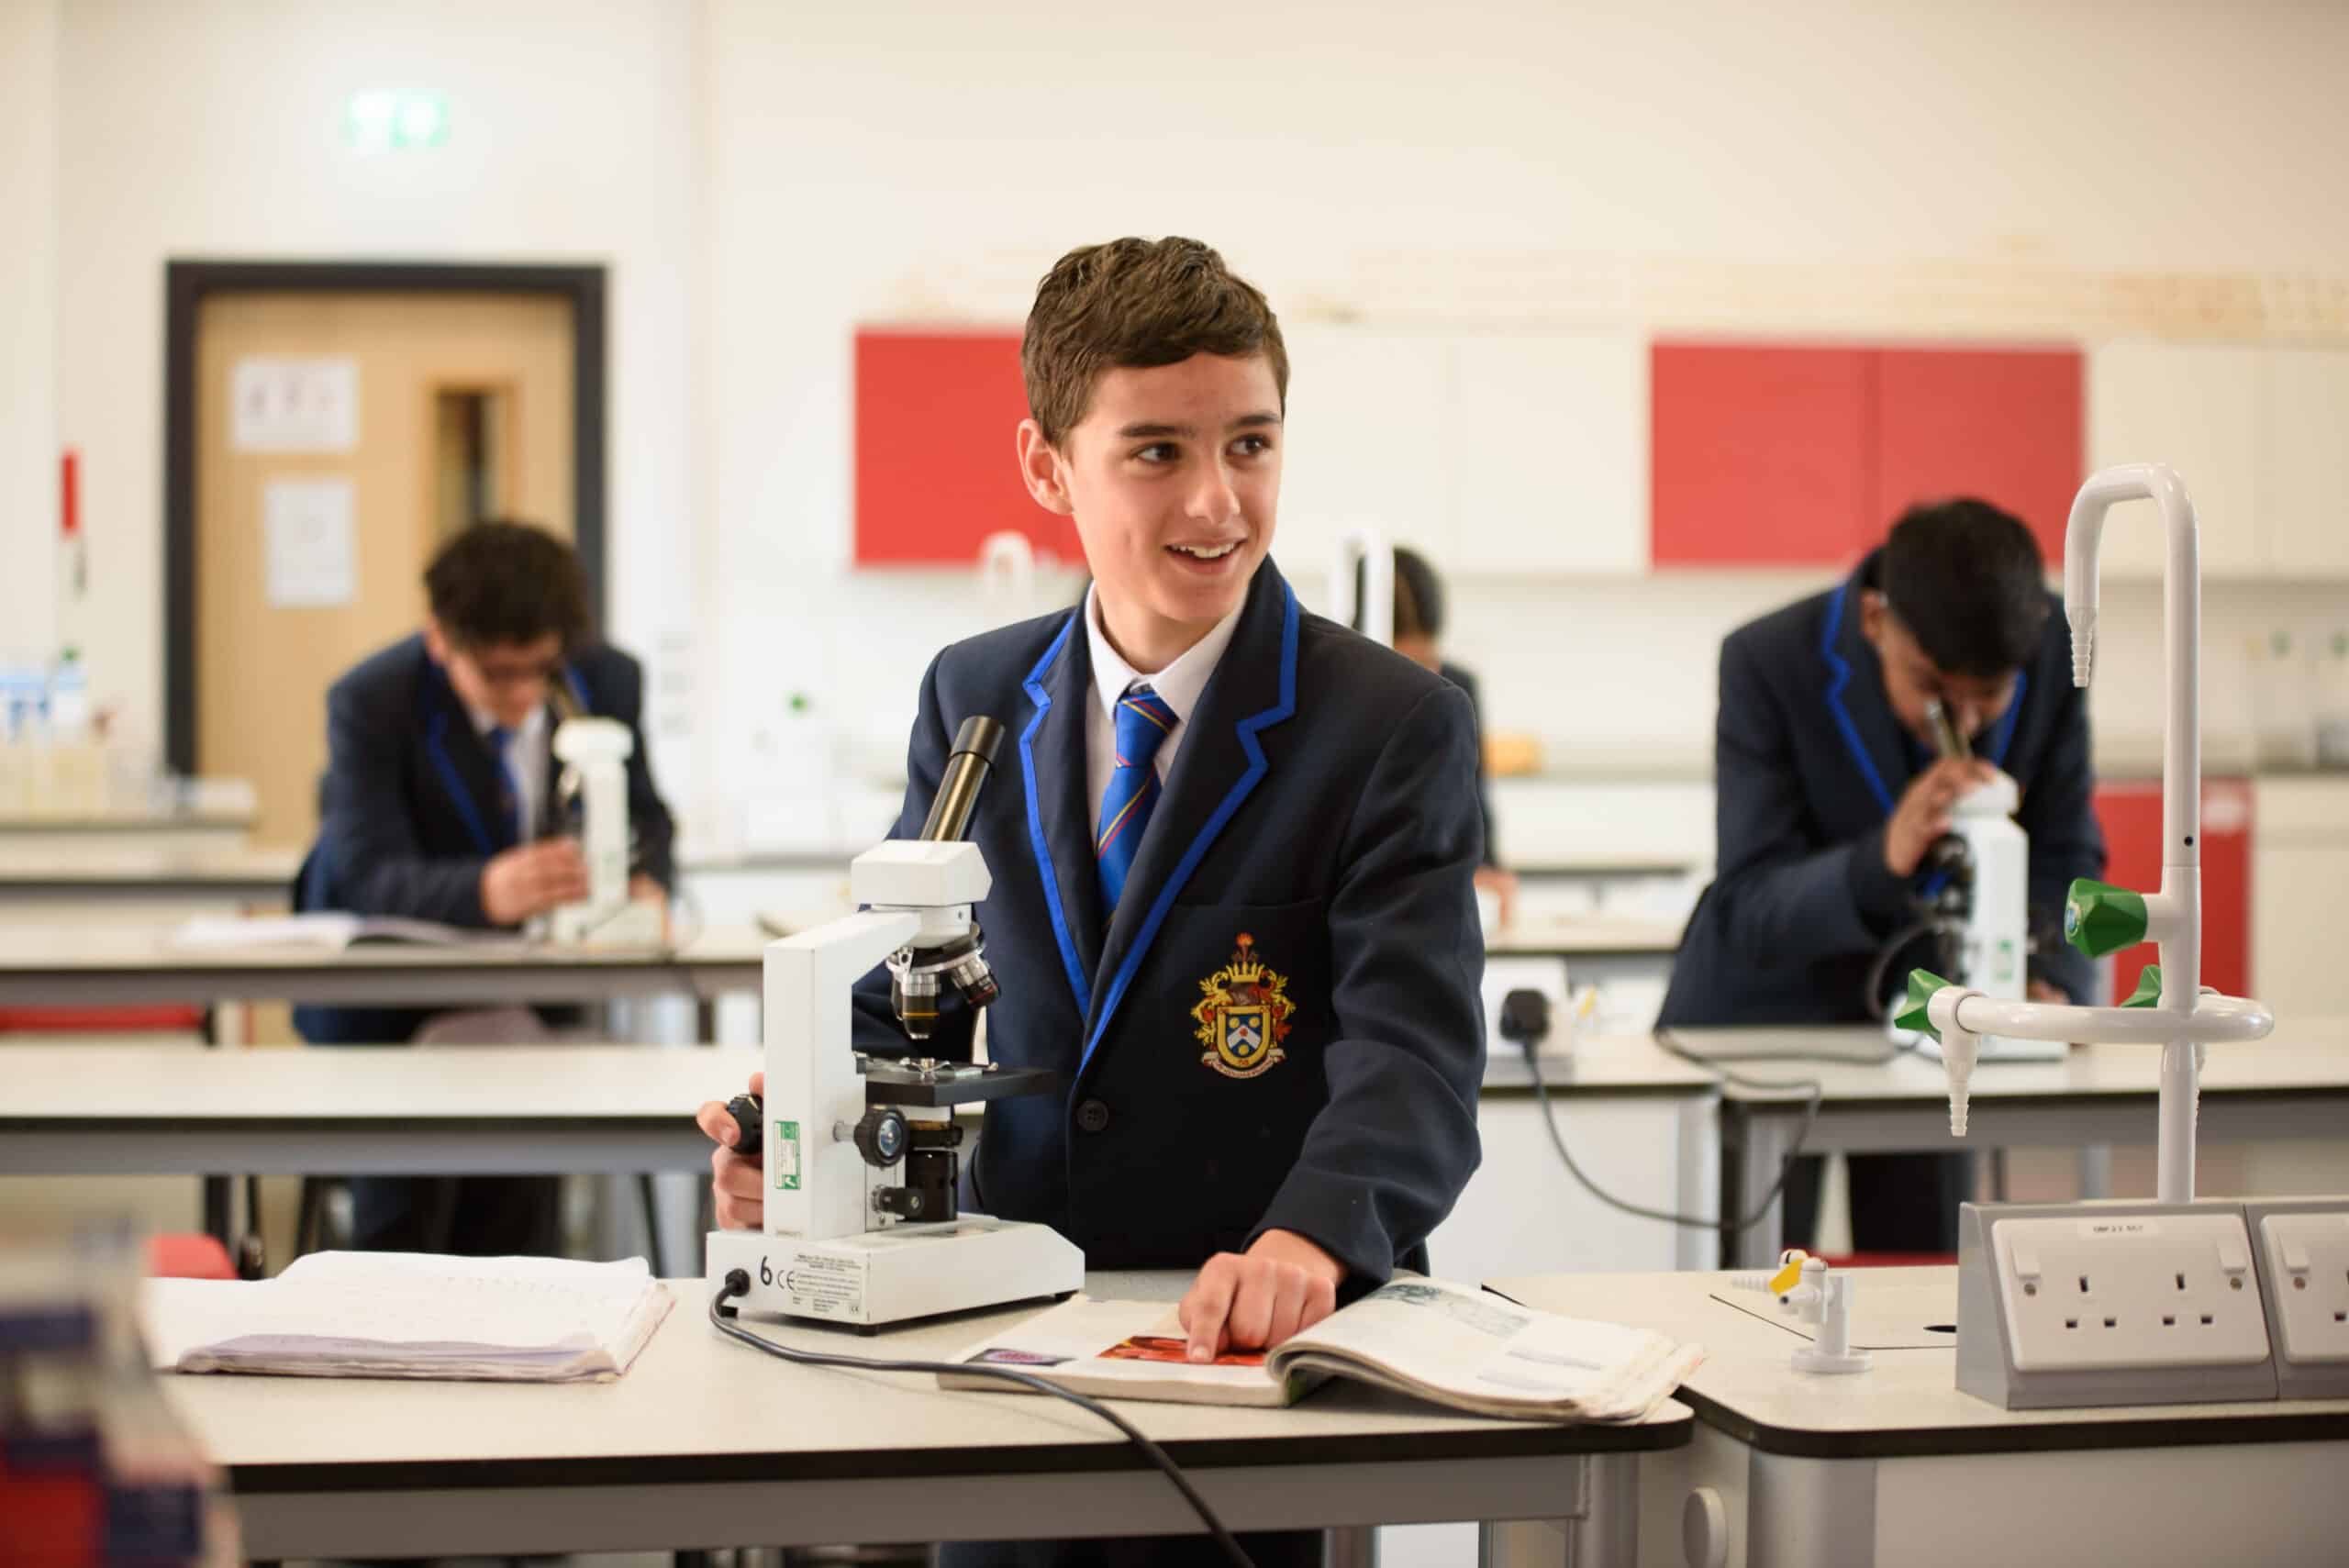 The Royal School Wolverhampton: Preparing students for the 21st century